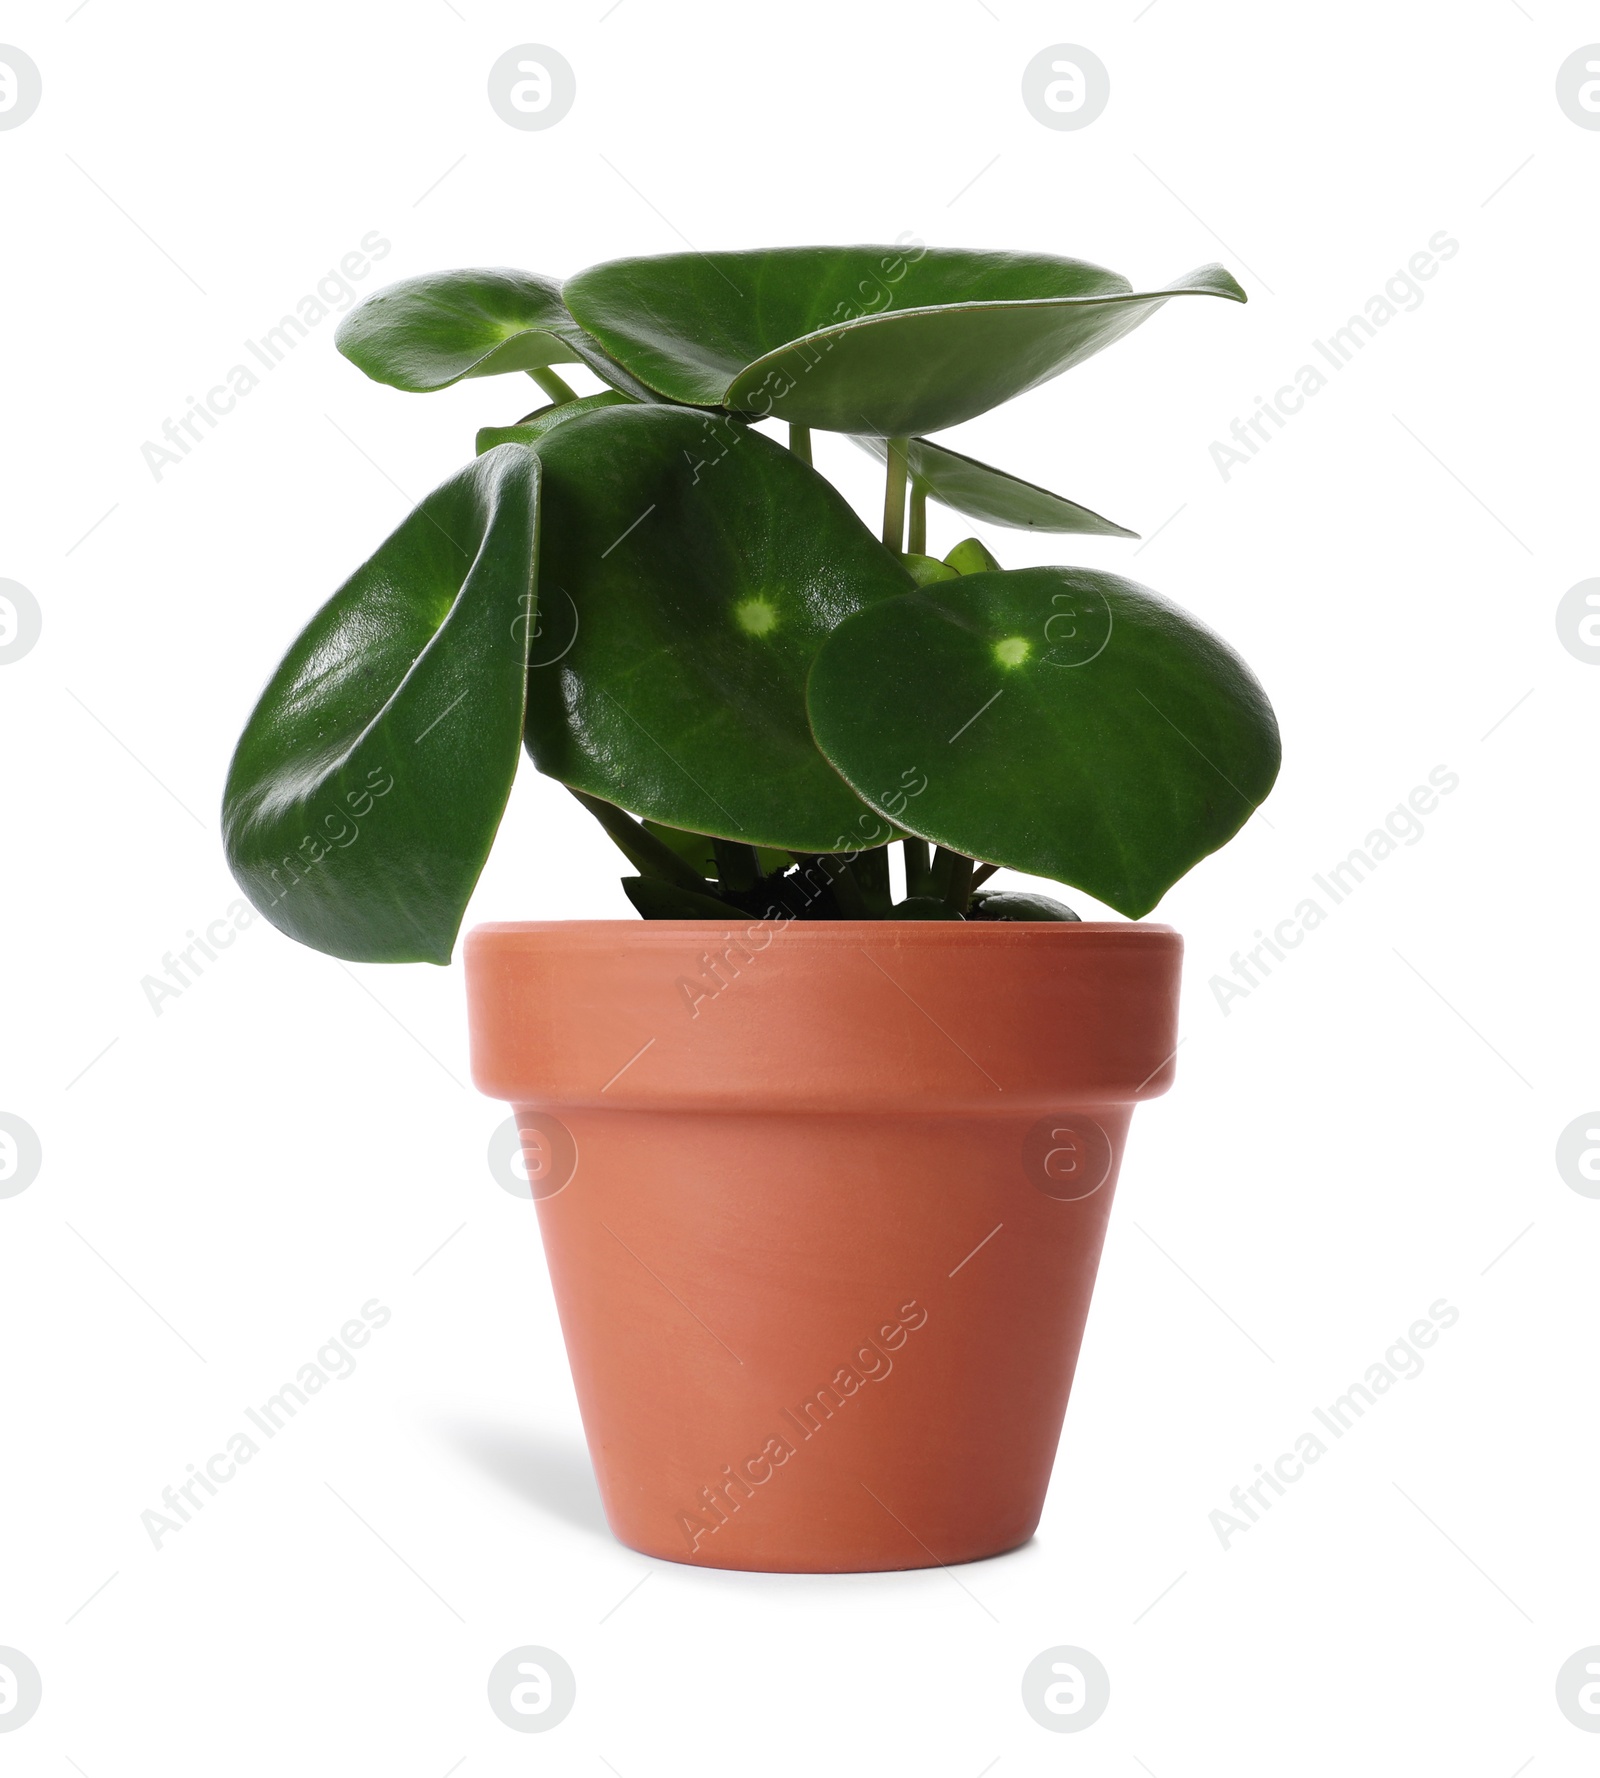 Image of Peperomia plant in terracotta pot isolated on white. House decor